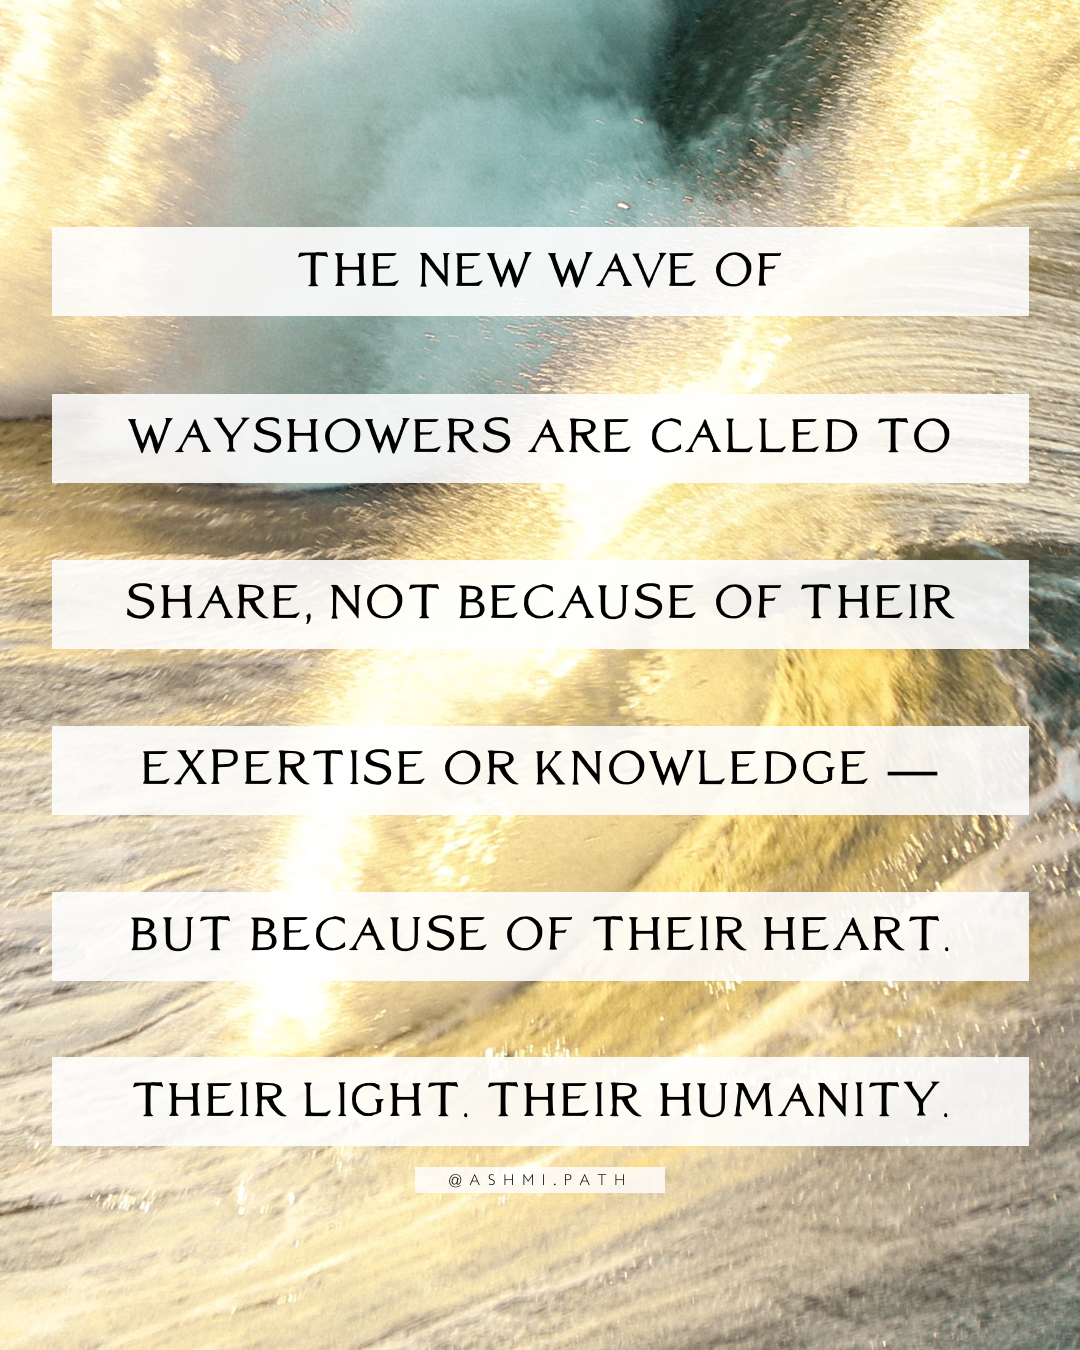 The New Wayshowers – From Teaching, to Sharing, to BEING